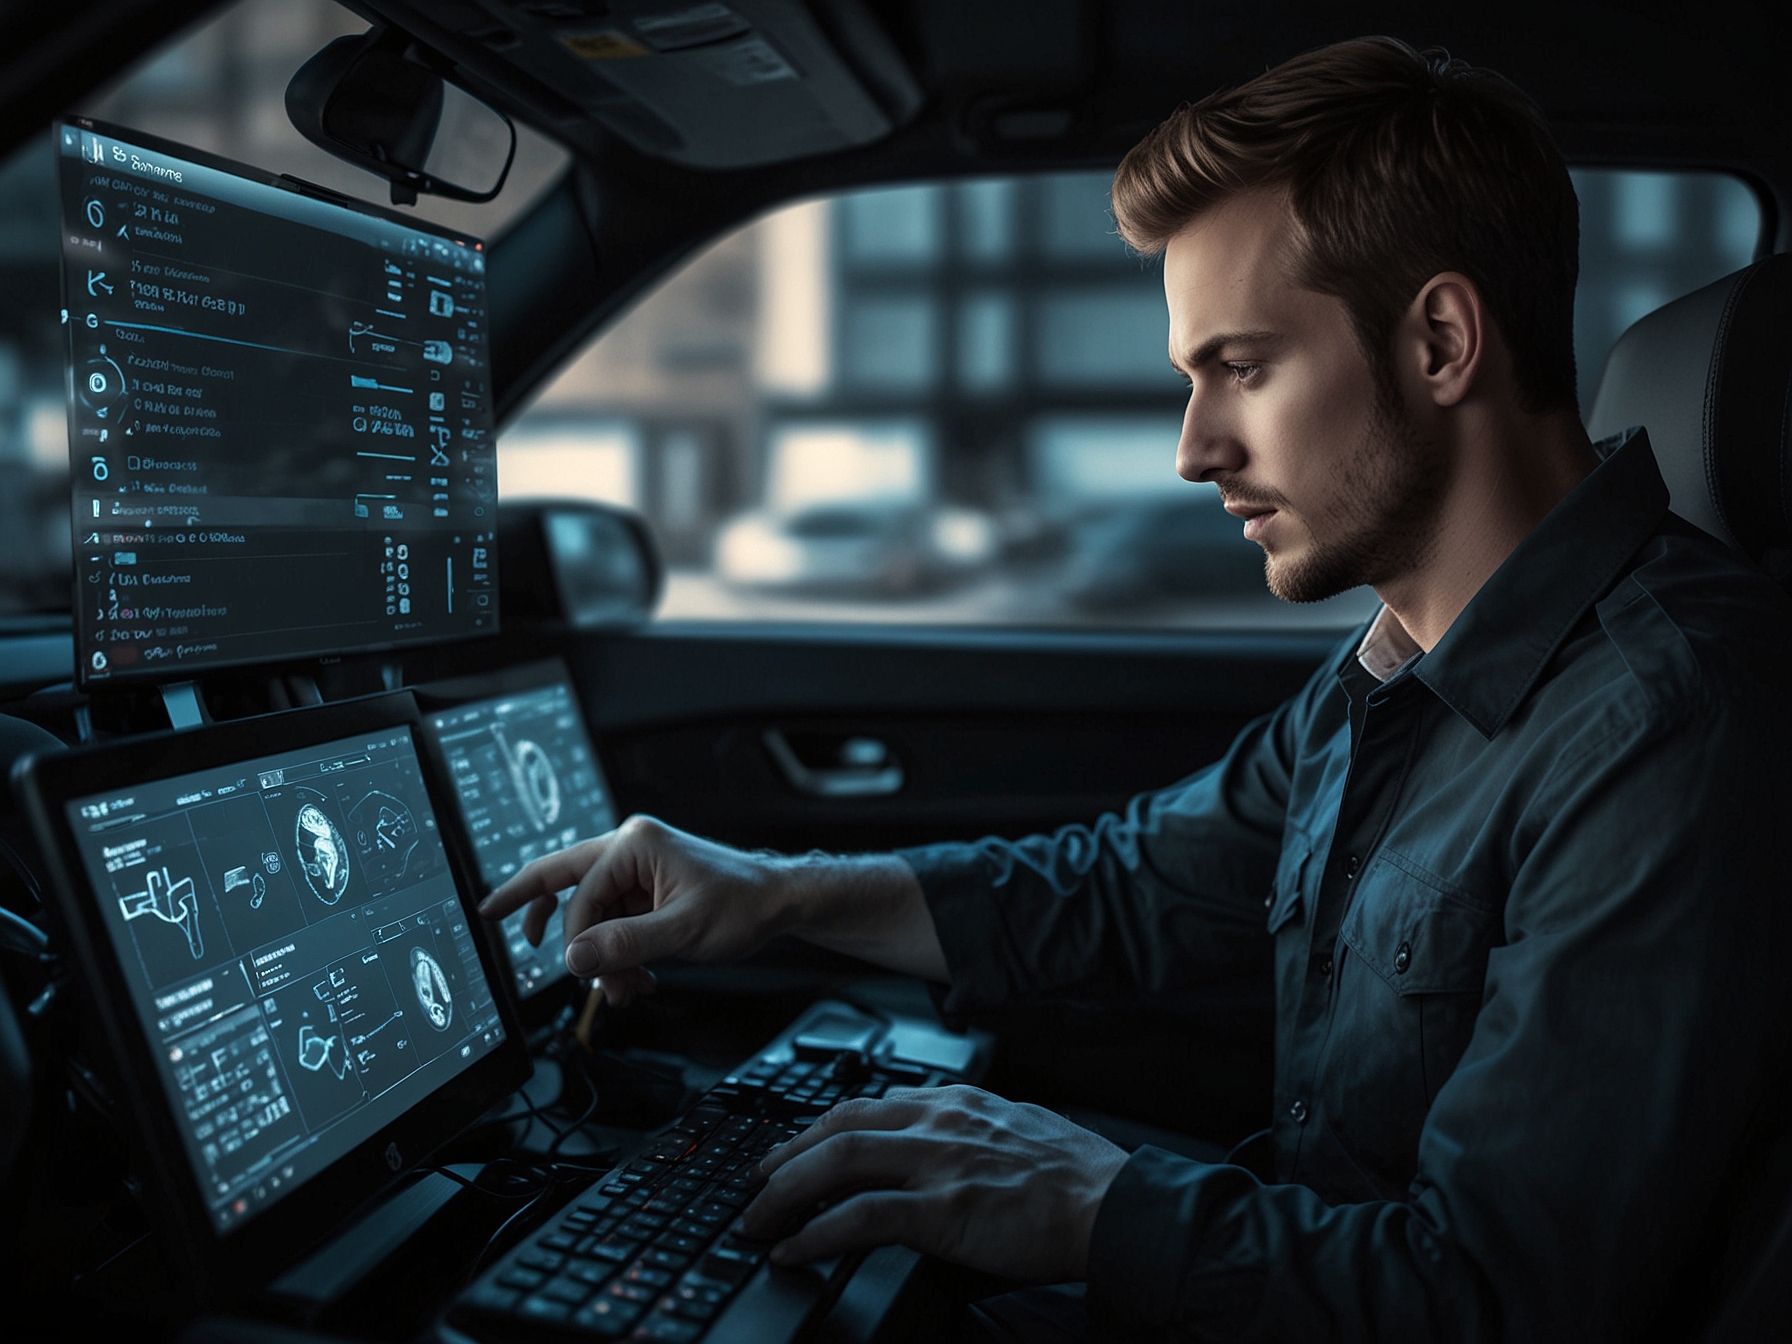 A driver updating car software, emphasizing the importance of keeping vehicle firmware up to date to protect against vulnerabilities and potential cyber attacks.